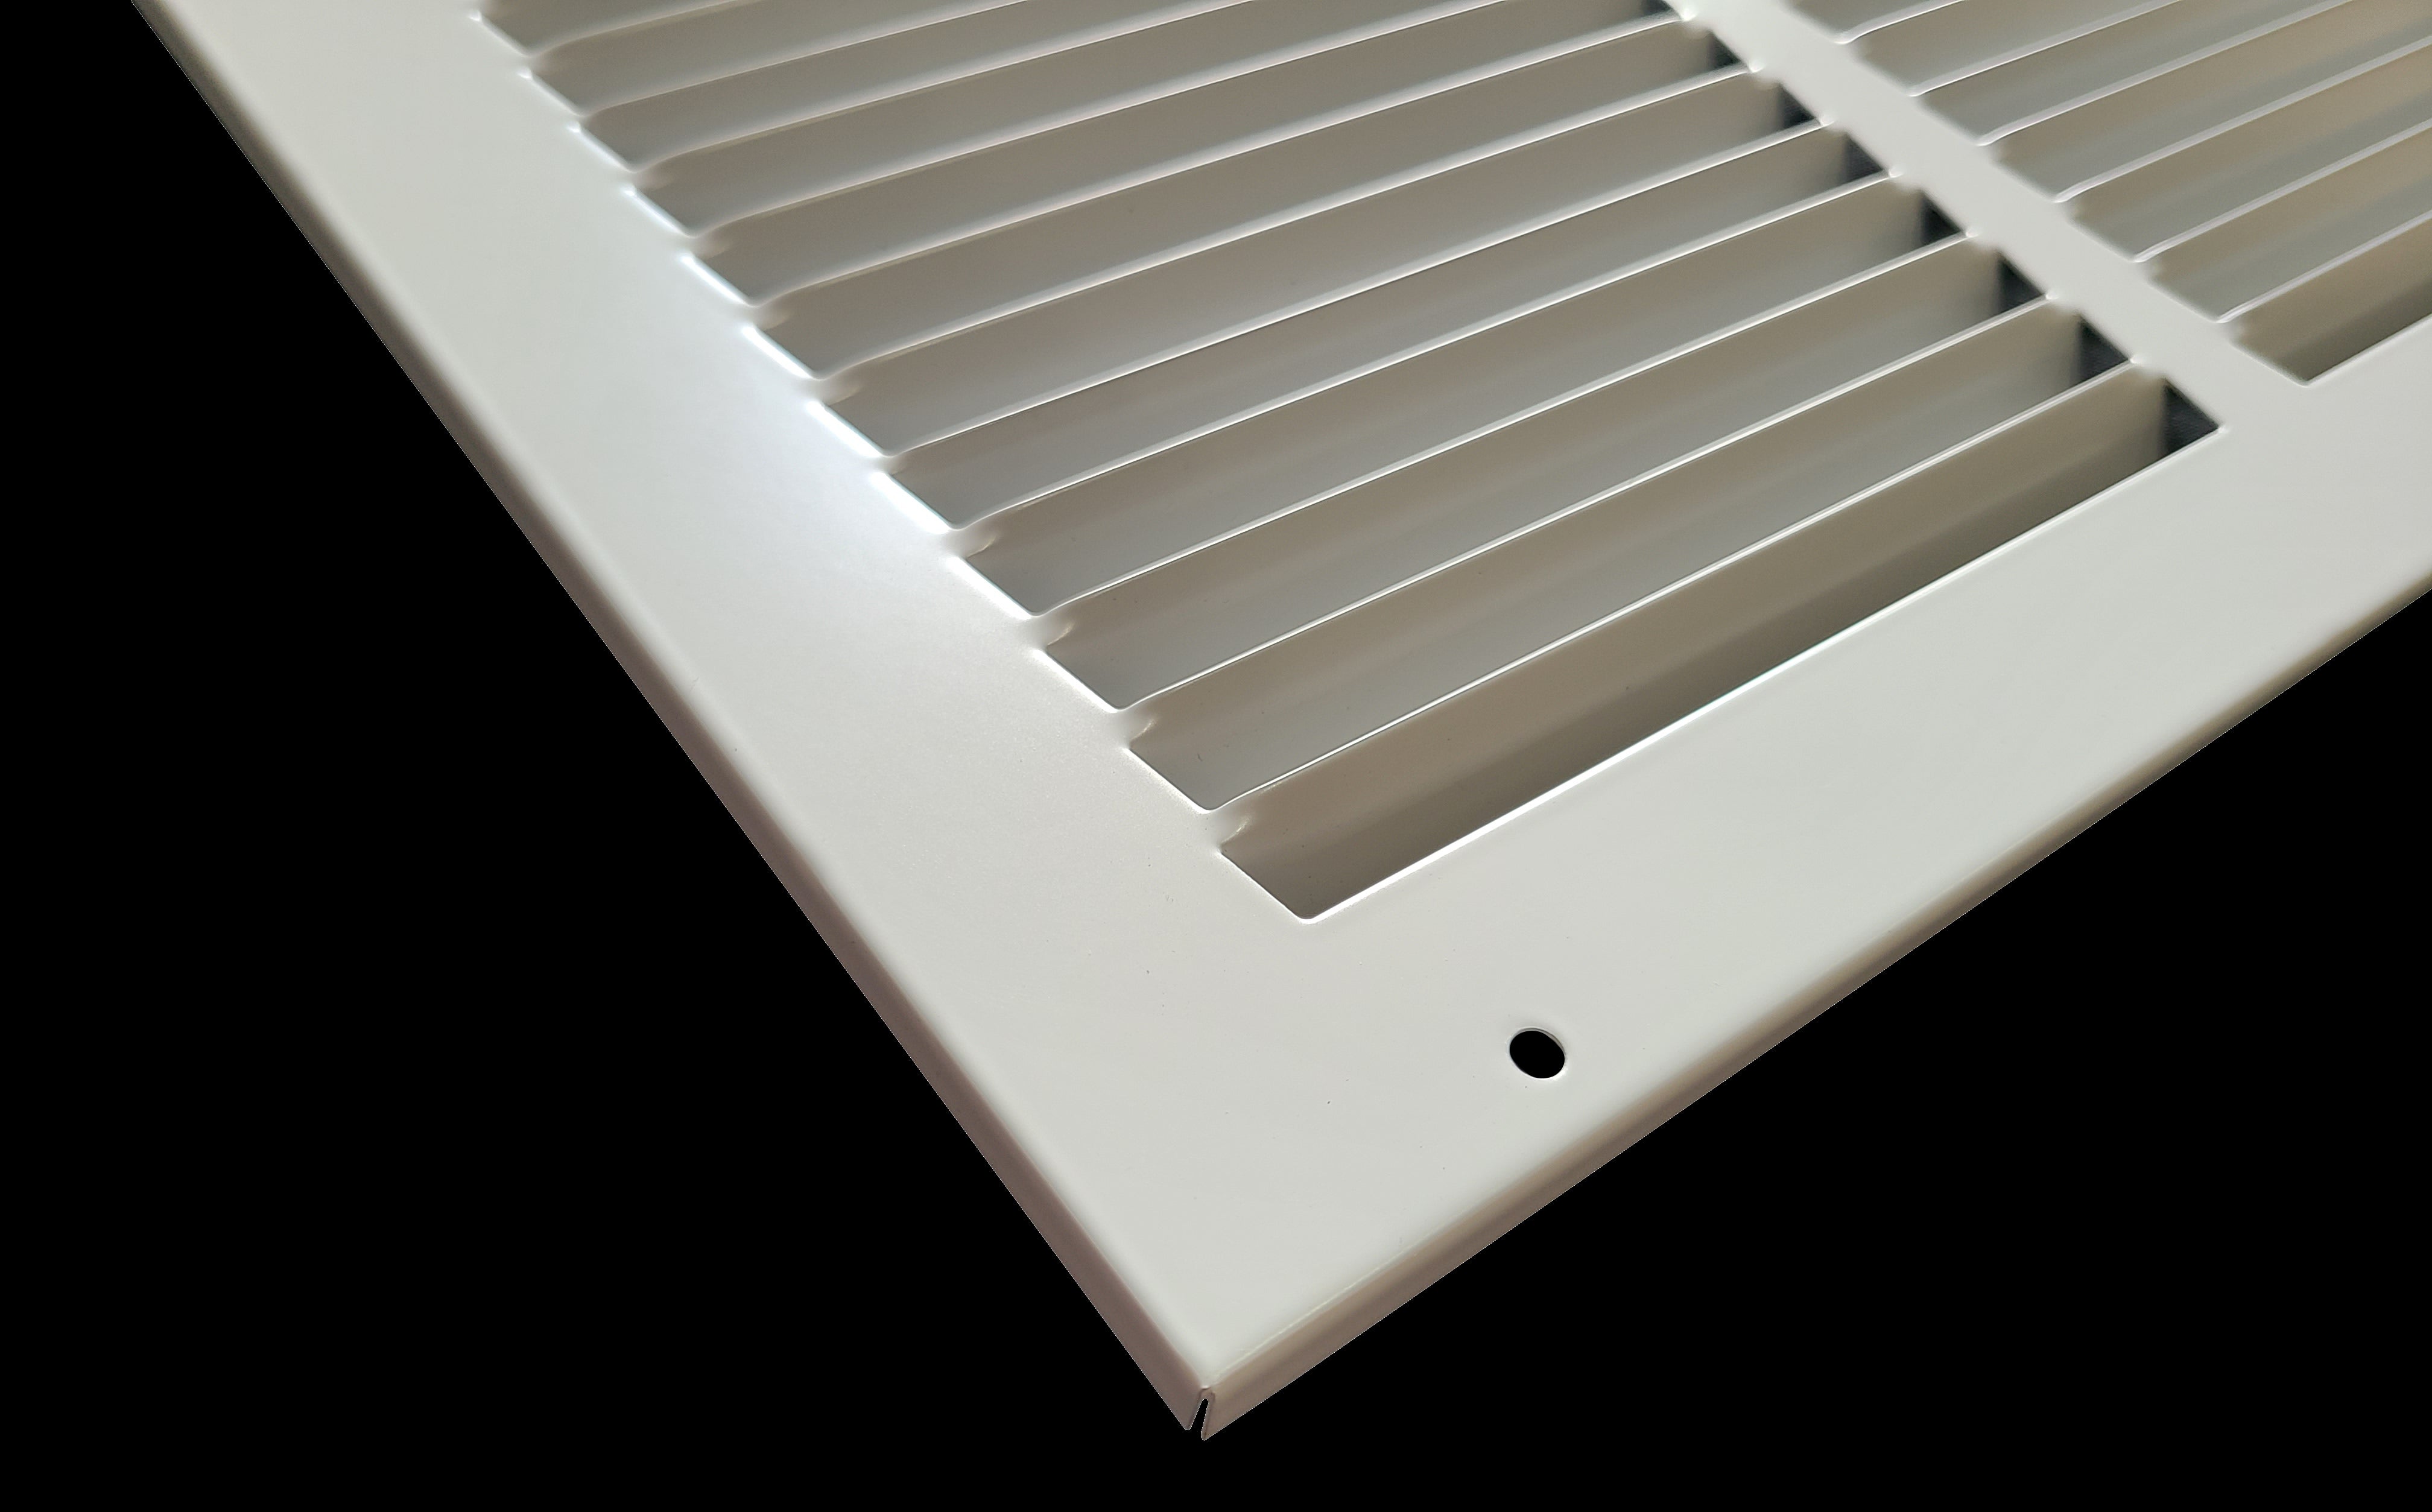 4" X 30" Duct Opening | Steel Return Air Grille for Sidewall and Ceiling | Outer Dimensions: 5.75"W X 31.75"H